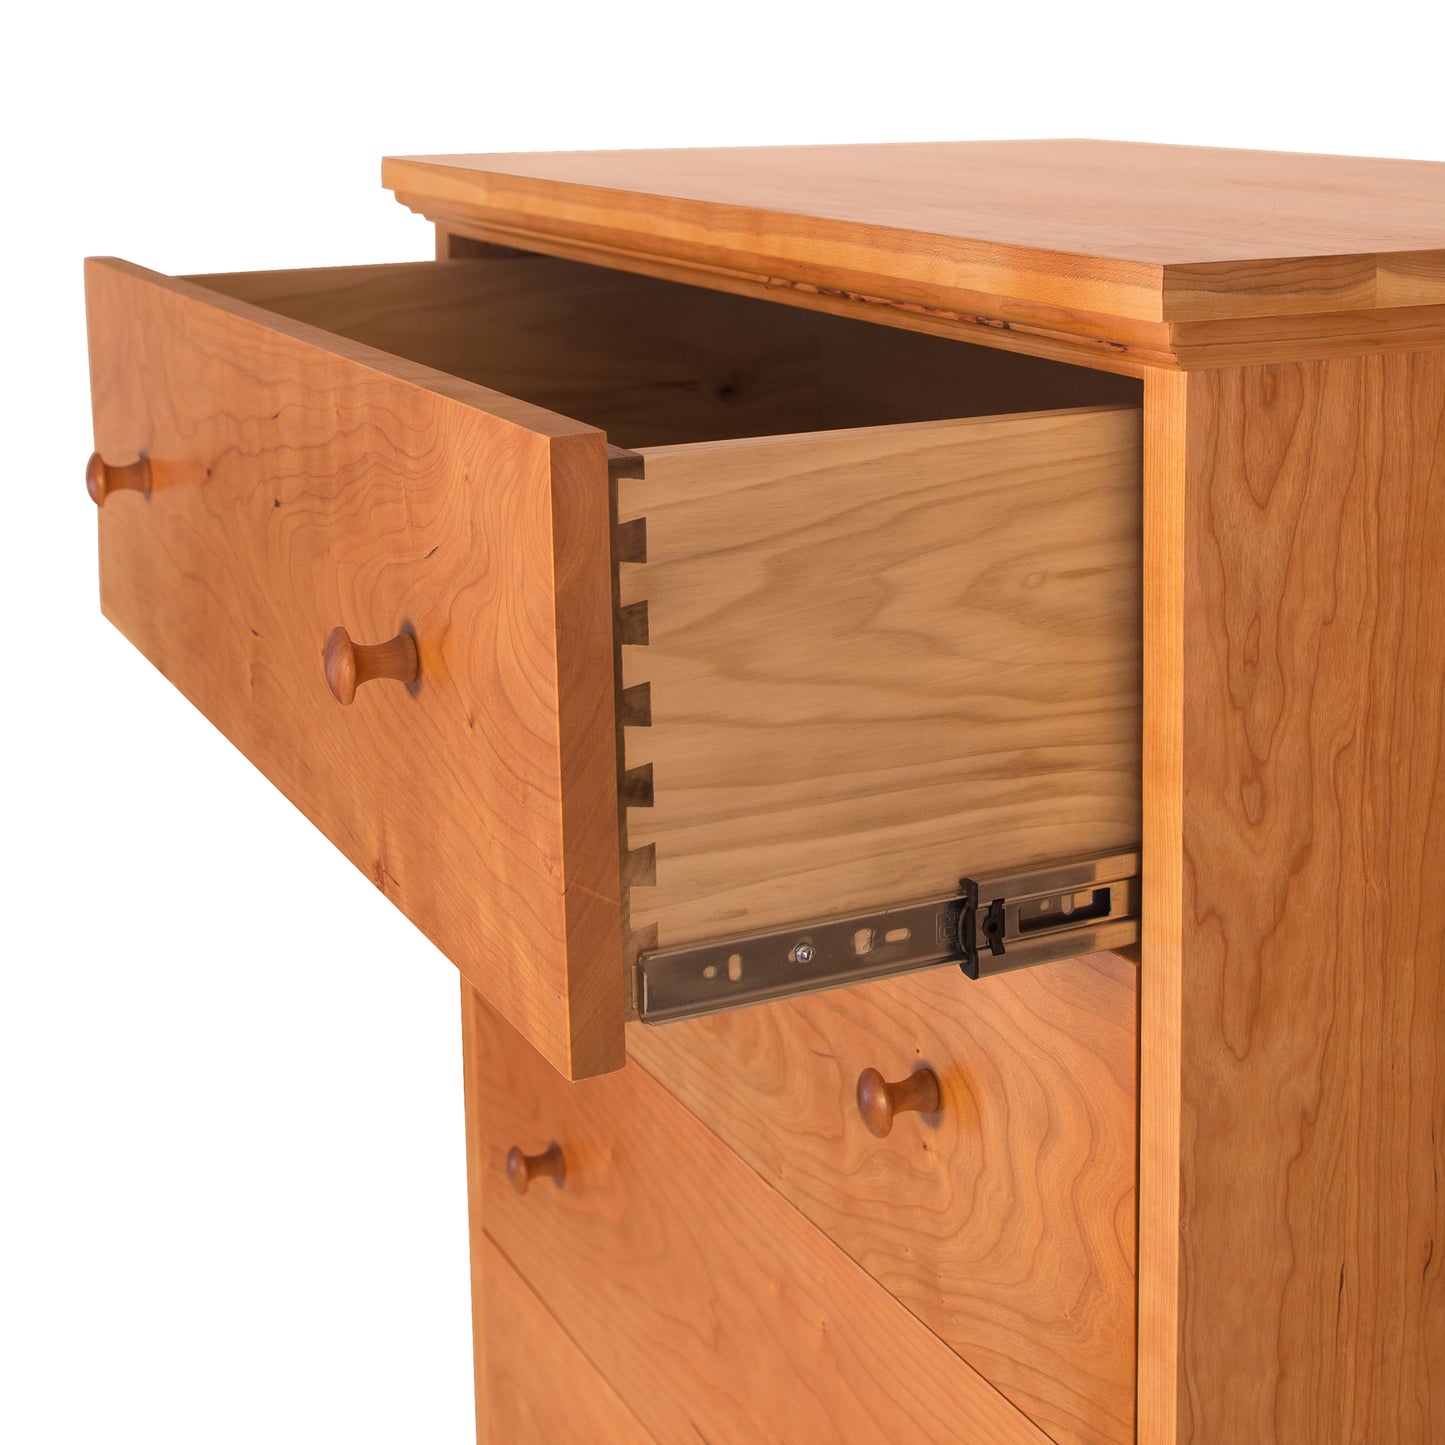 A Lyndon Furniture American Country 4-Drawer Chest with a drawer open, made of solid wood.